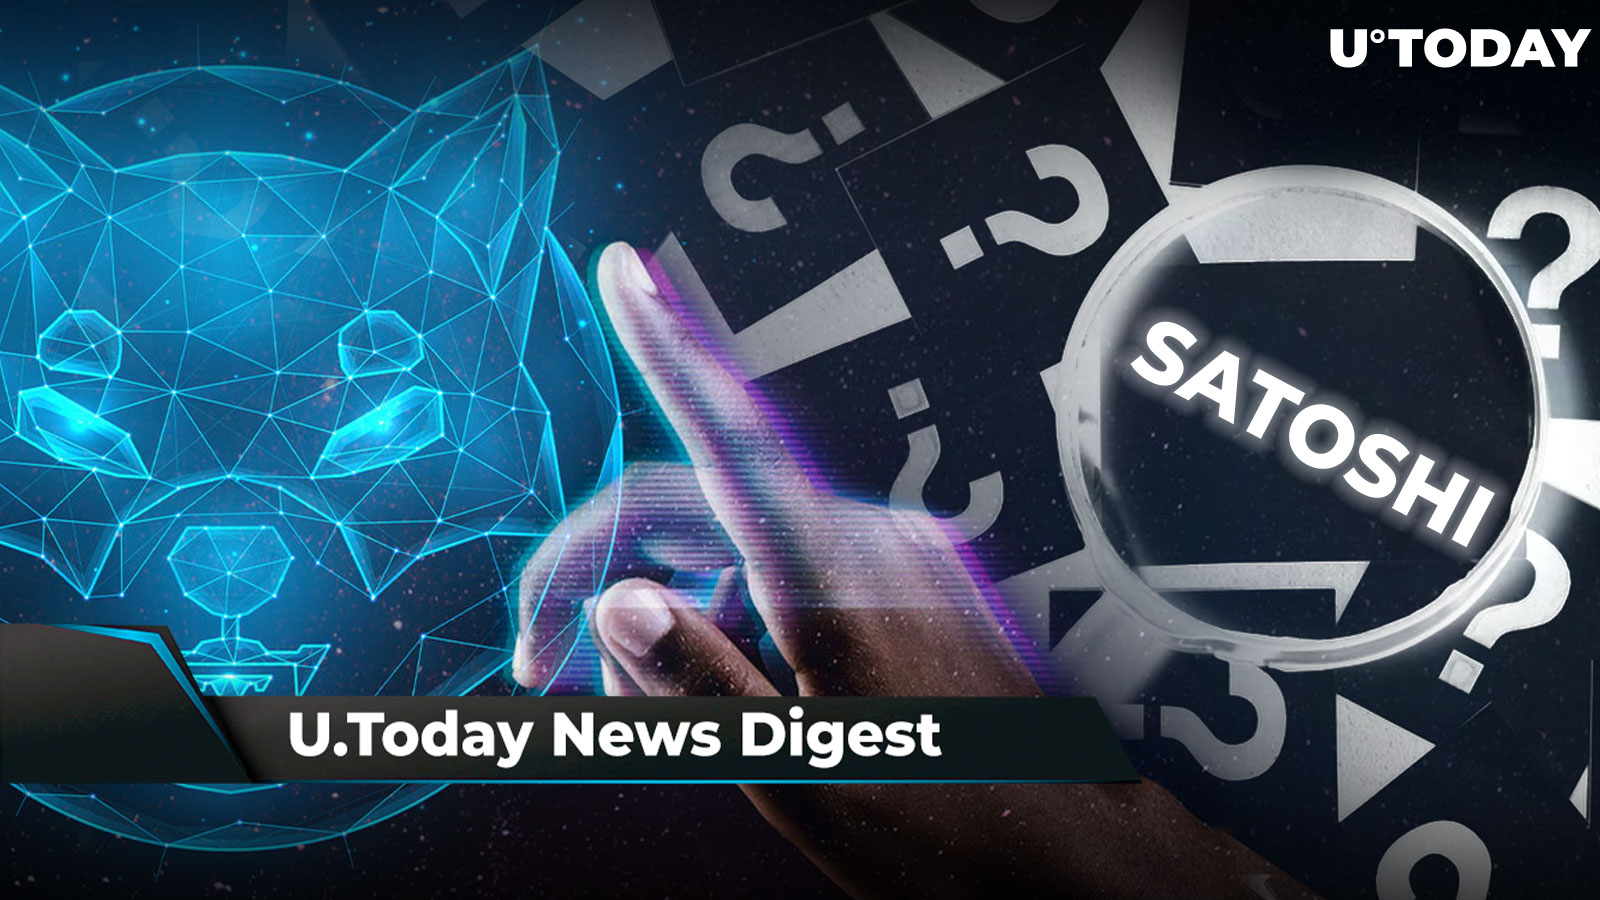 Shiba Inu Presents Rocket Pond Trailer, CEO Shares Guess on Satoshi Nakamoto's Identity, Former SEC Official Urges Crypto Owners to 'Get Out Now': Crypto News Digest by U.Today